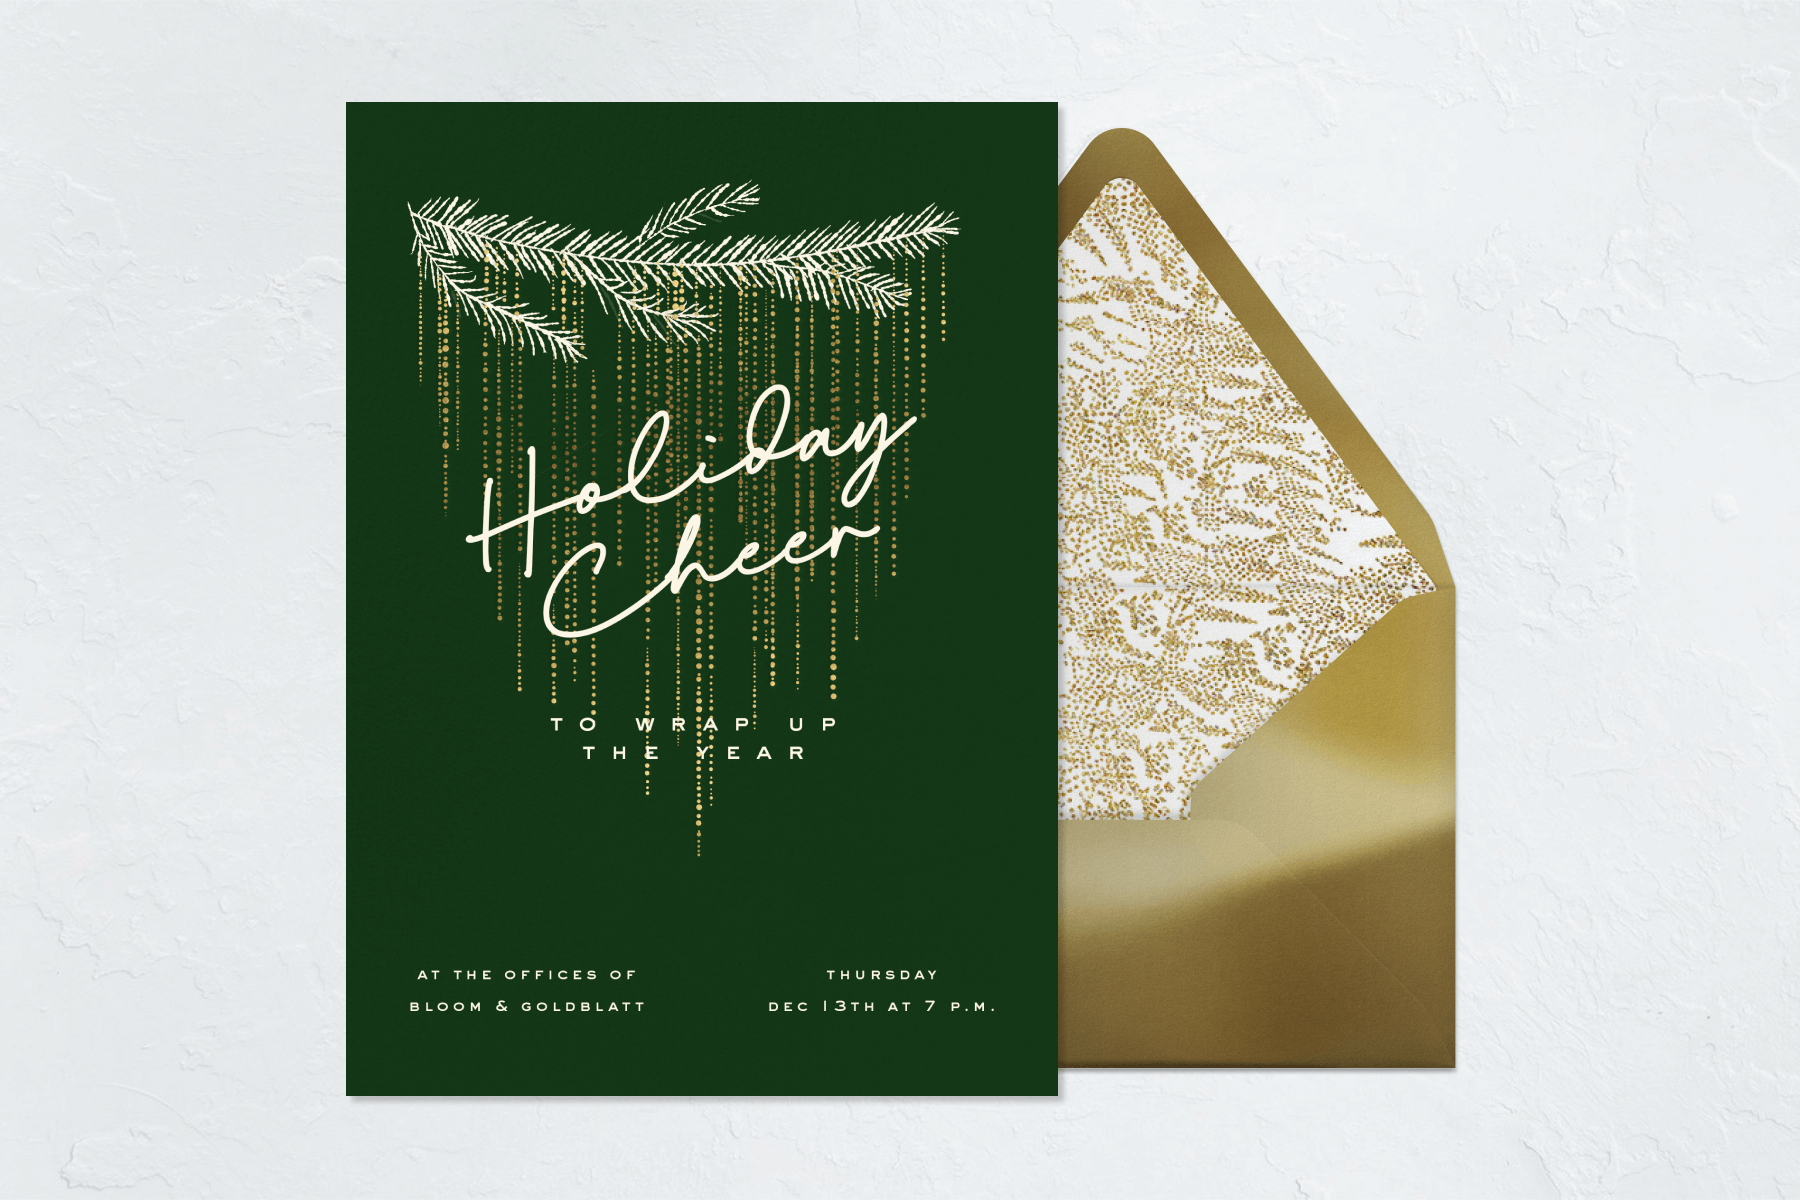 A dark green invitation beside a gold envelope reads, in script, “Holiday cheer” followed by “to wrap up the year” with an illustration of a white fir tree branch dripping with gold “tinsel” dots.